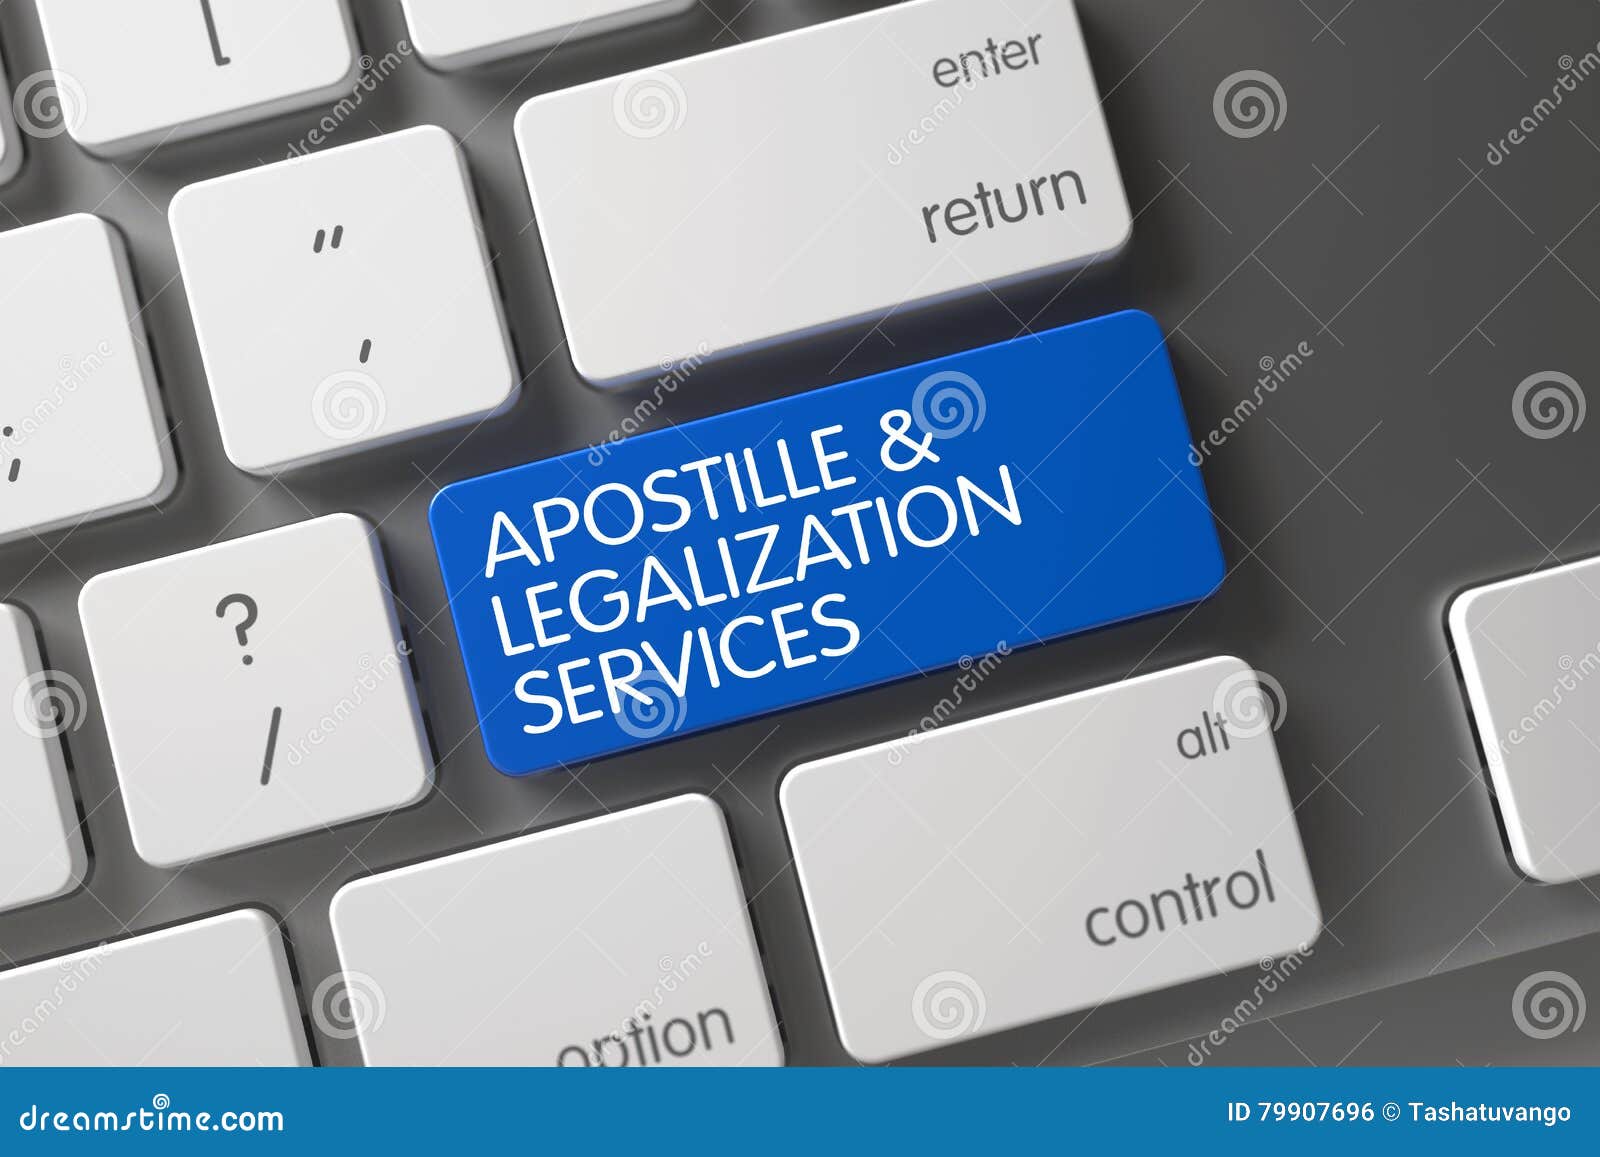 apostille and legalization services closeup of keyboard. 3d.